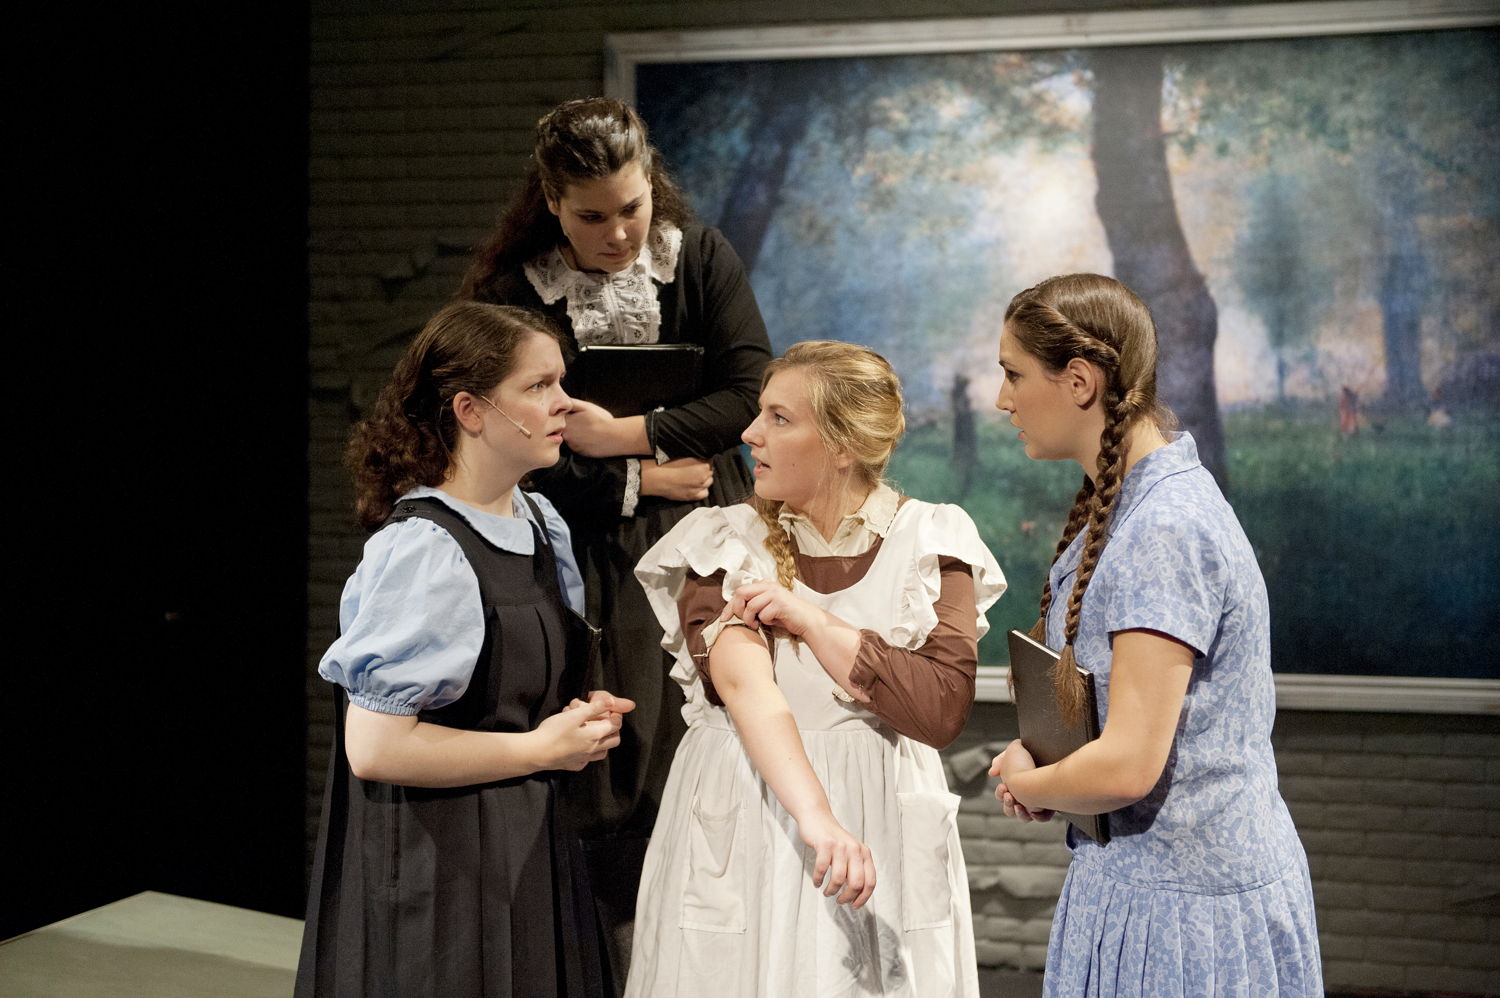 Colleen Maguire (Anna), Alexa MacDougall (Thea), Kaley Cronk (Martha) and Siobhan Barker (Wendla) in Spring Awakening / Music by DUNCAN SHEIK, Book & Lyrics by STEVEN SATER / Photos by David Lowes.

<a href="http://www.belfry.bc.ca/spring-awakening/" rel="nofollow">www.belfry.bc.ca/spring-awakening/</a>
